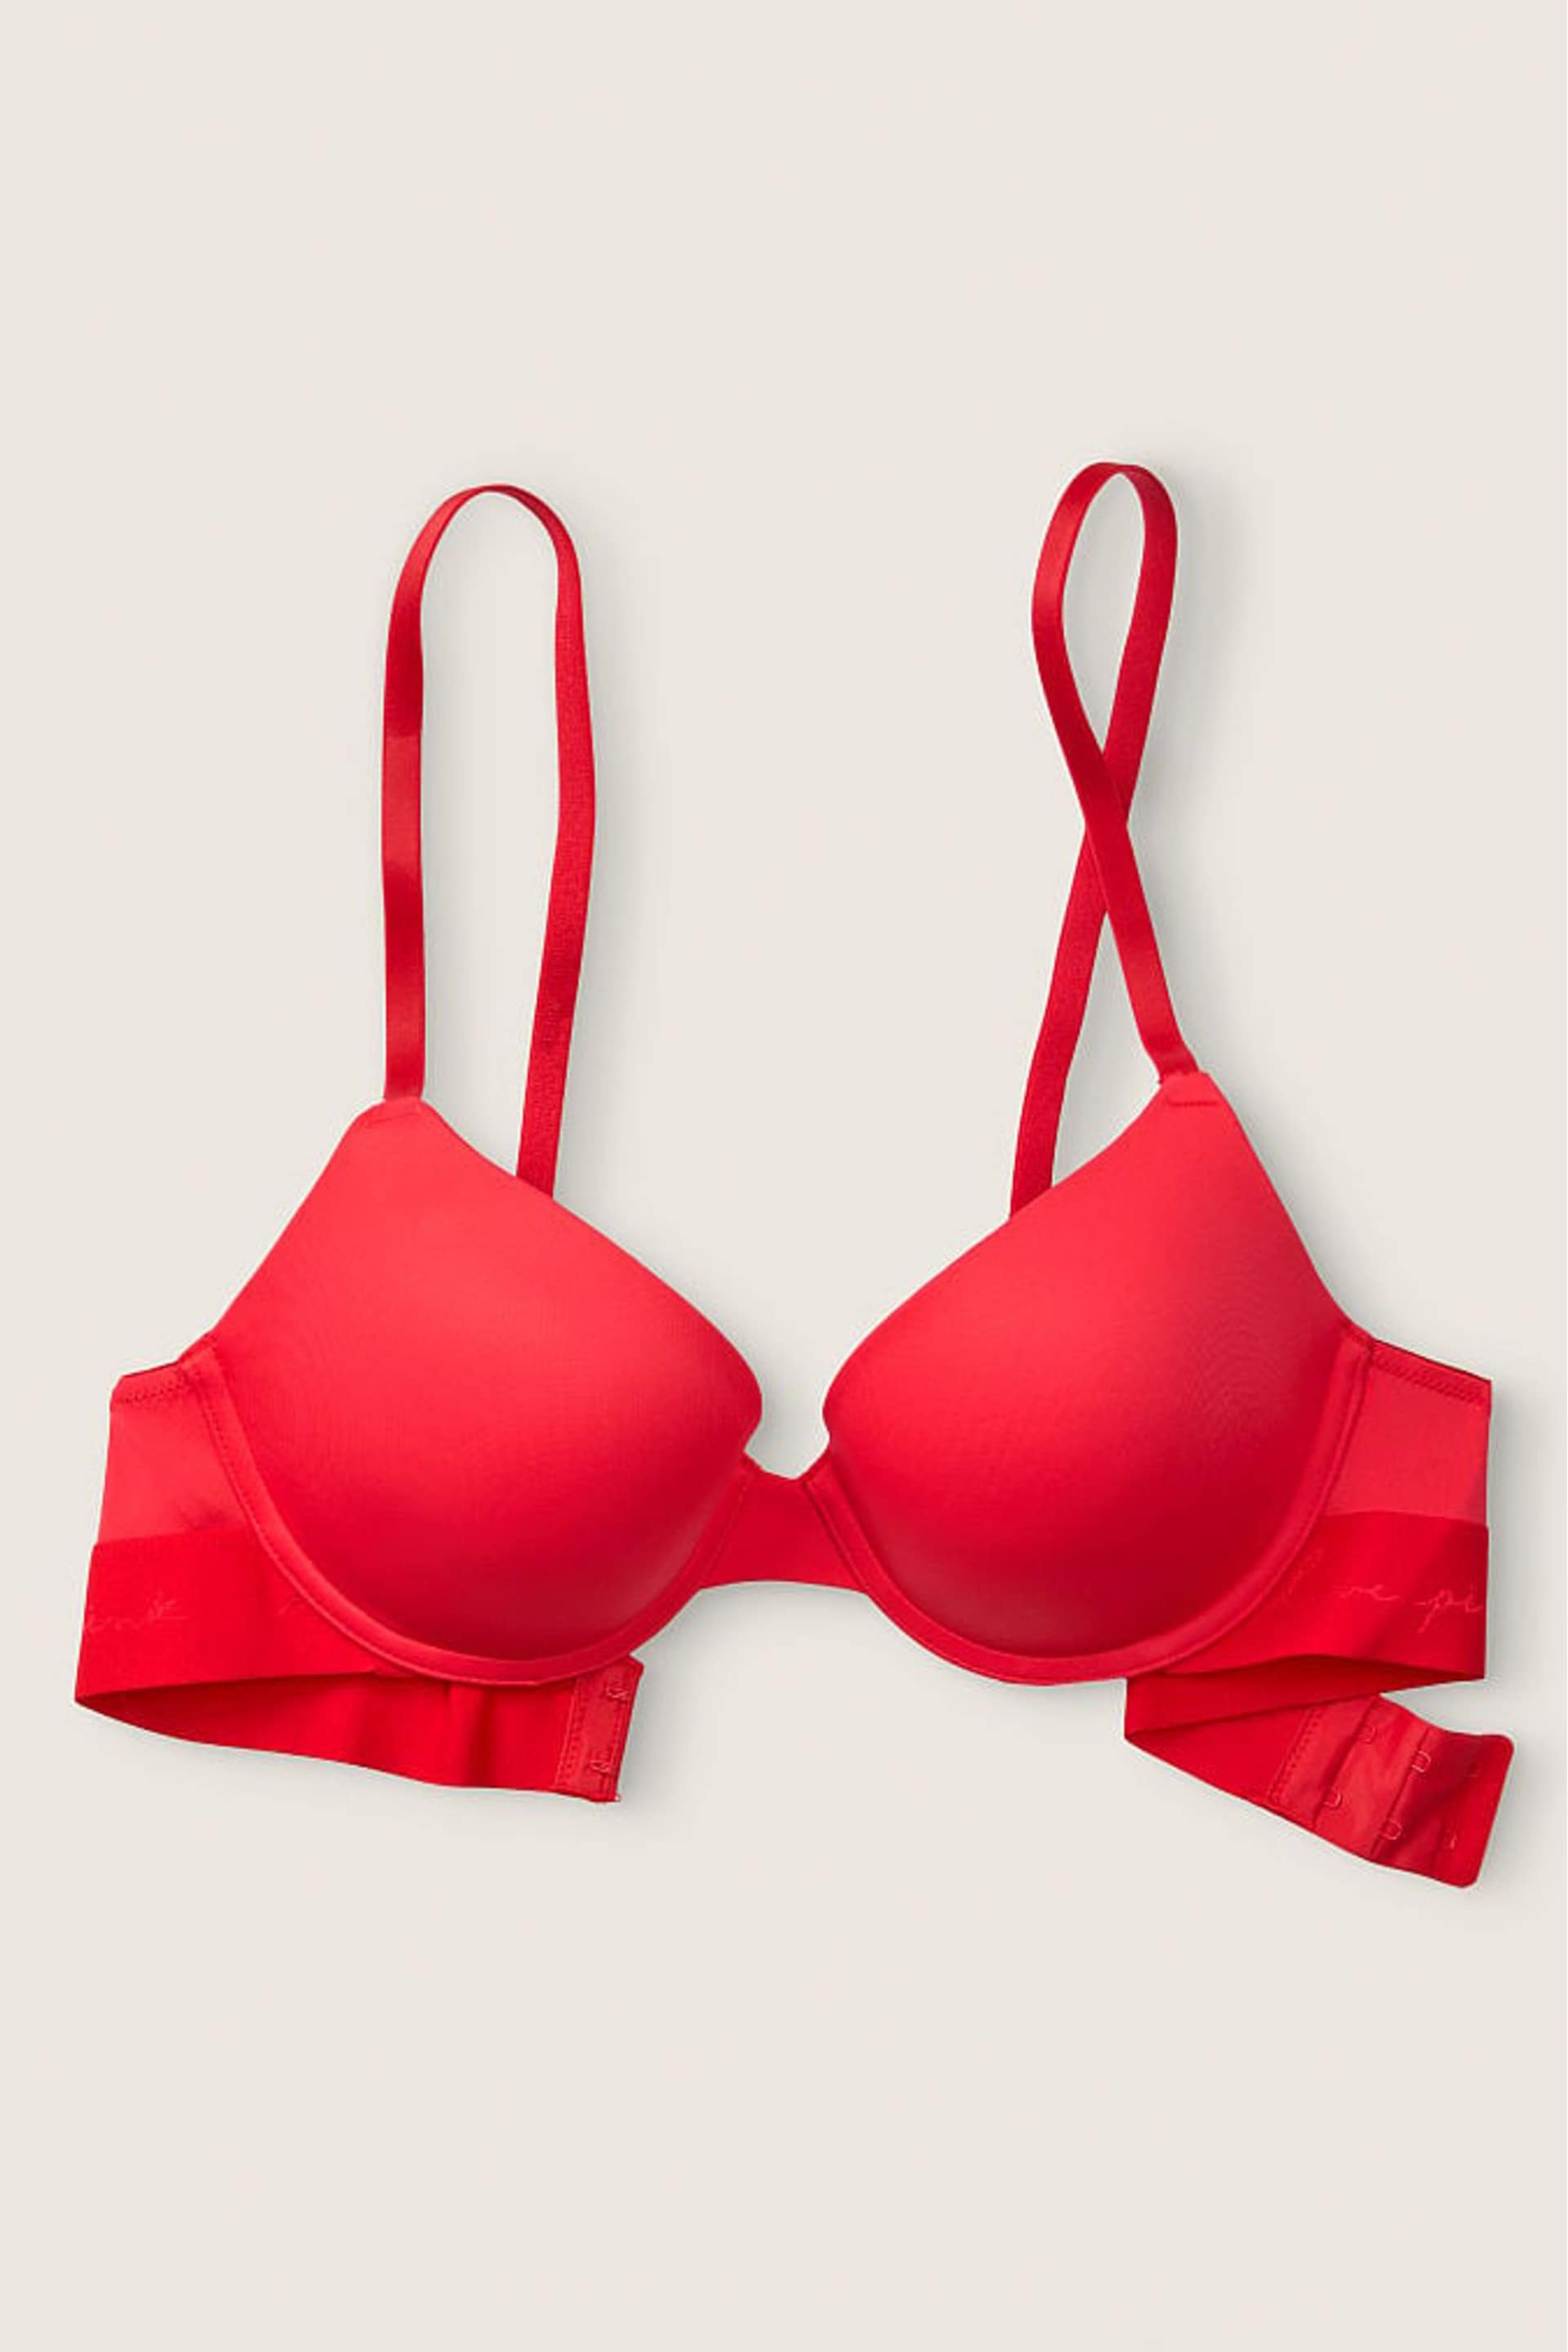 Victoria's Secret PINK Red Pepper Smooth Push Up T-Shirt Bra - Image 4 of 5